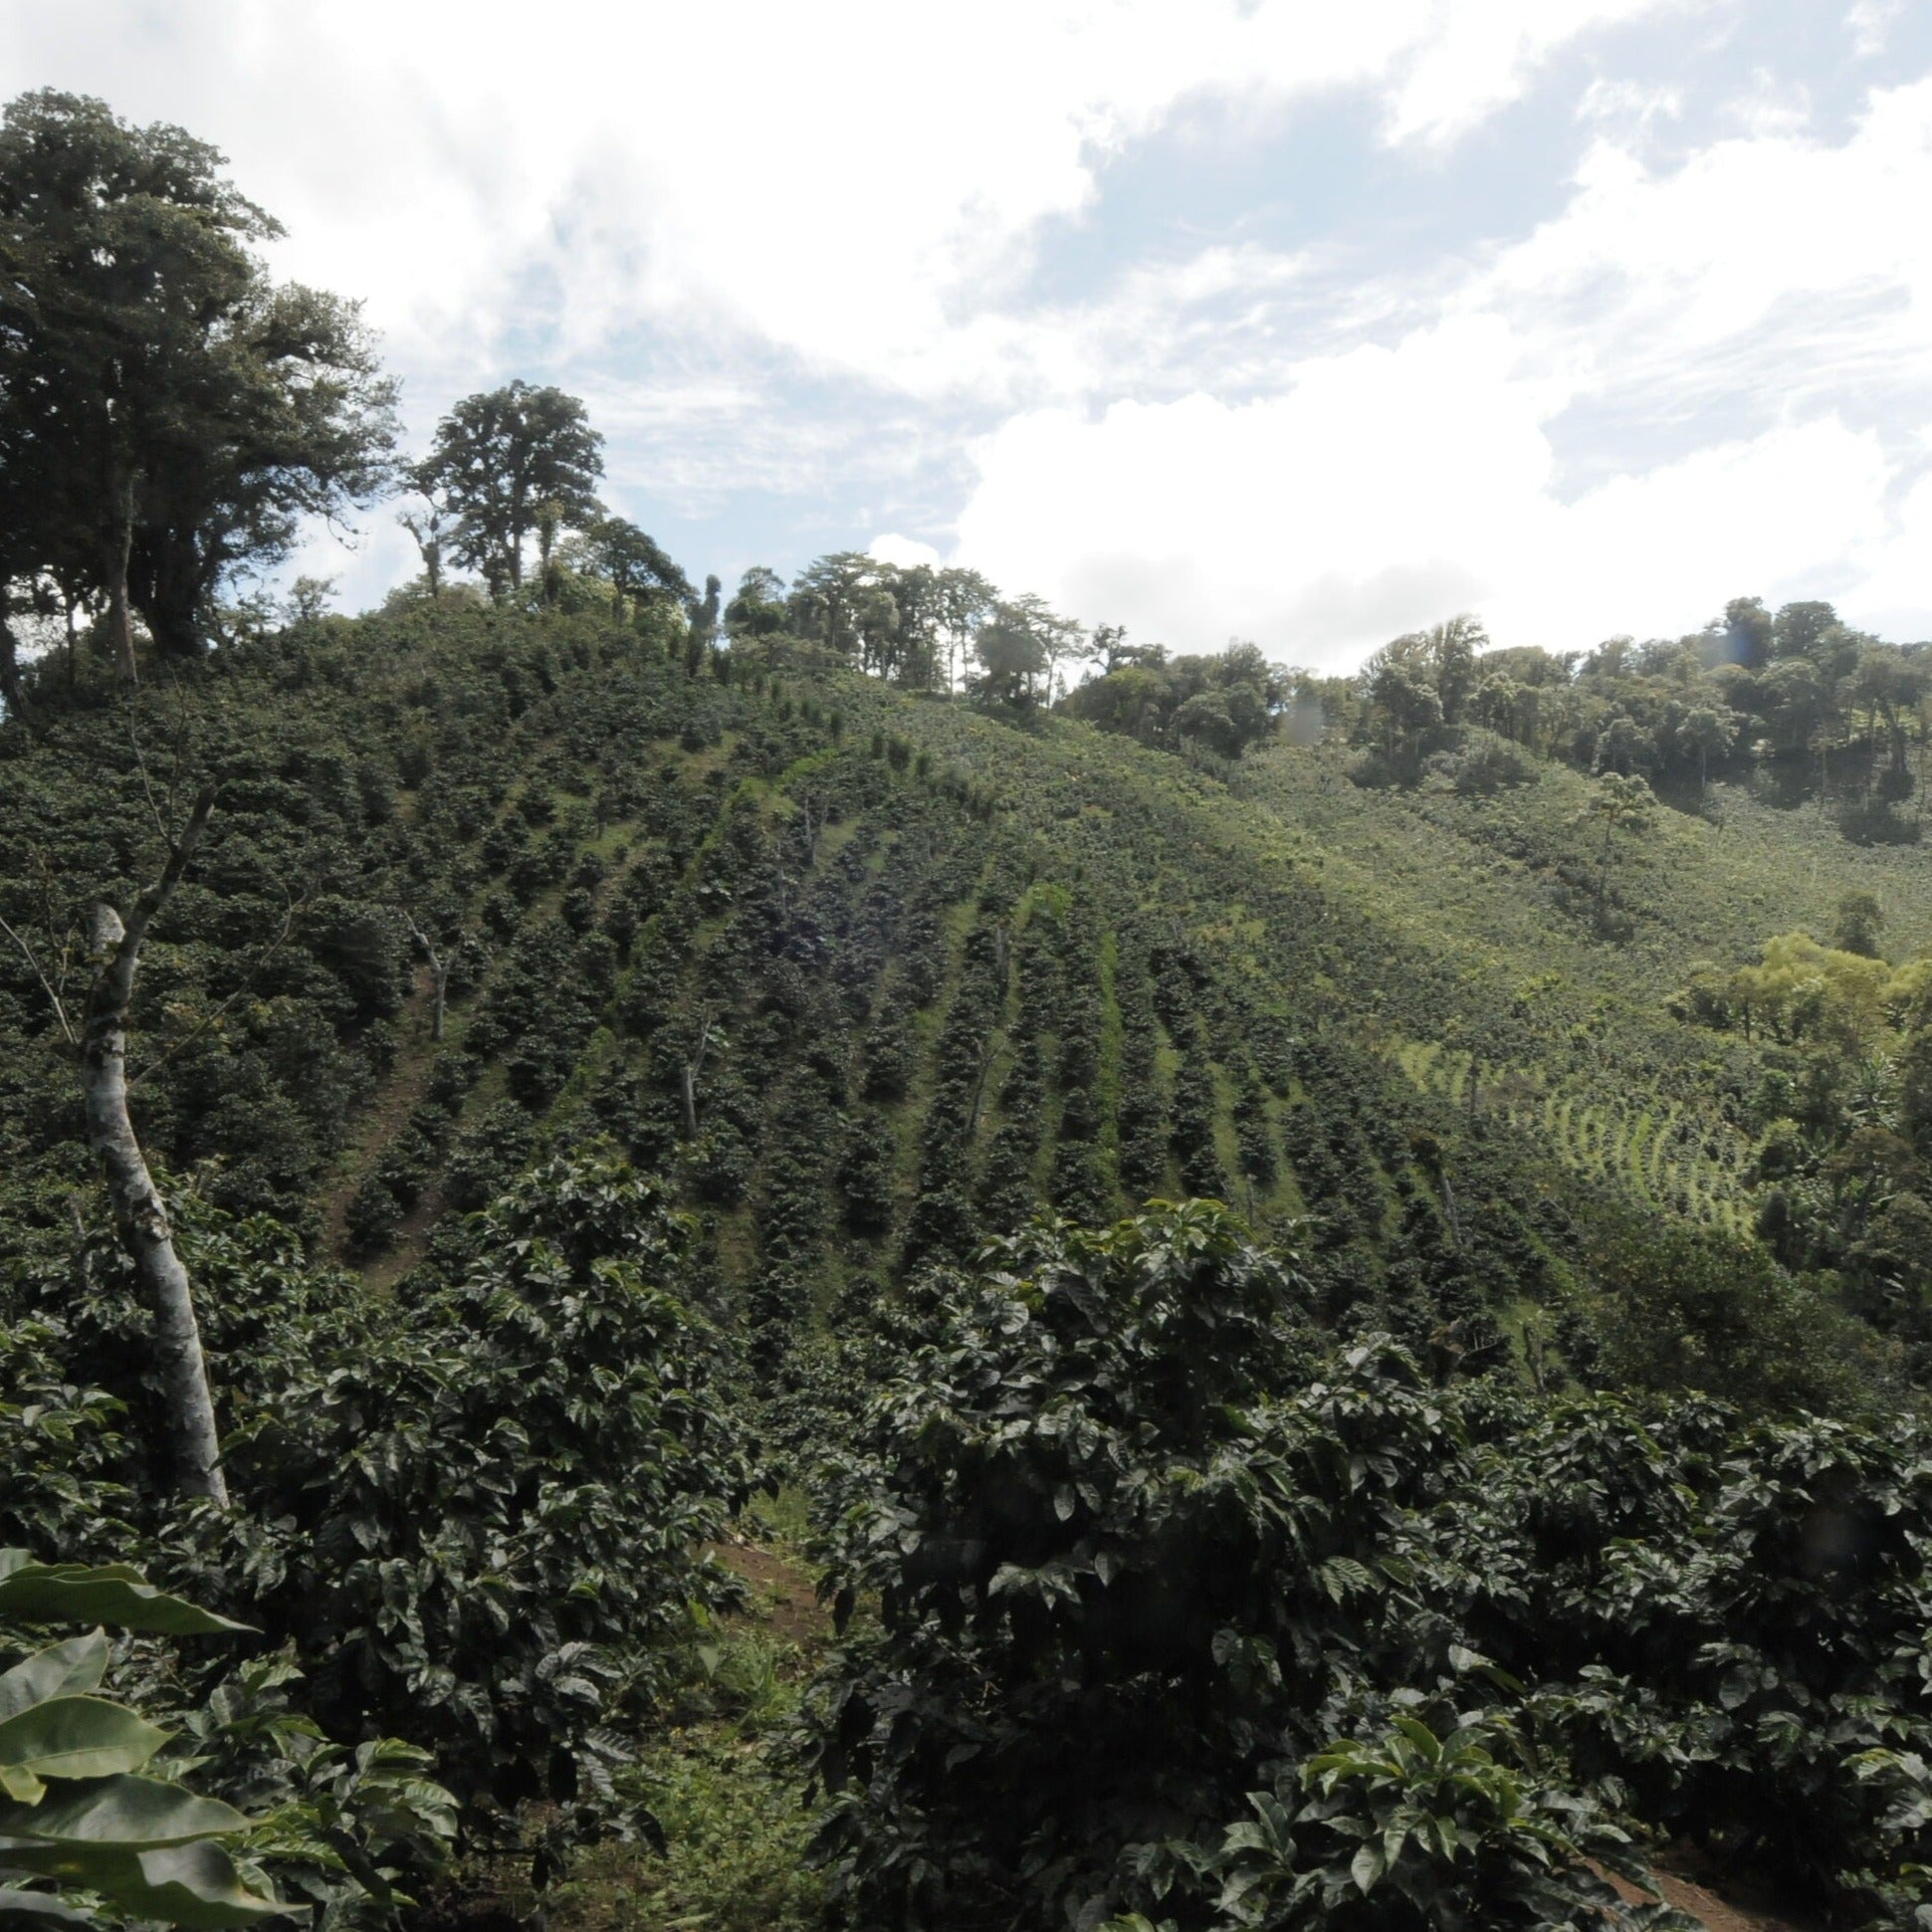 Hillside of coffee farm, with rows and green trees and vibrant green hillside.